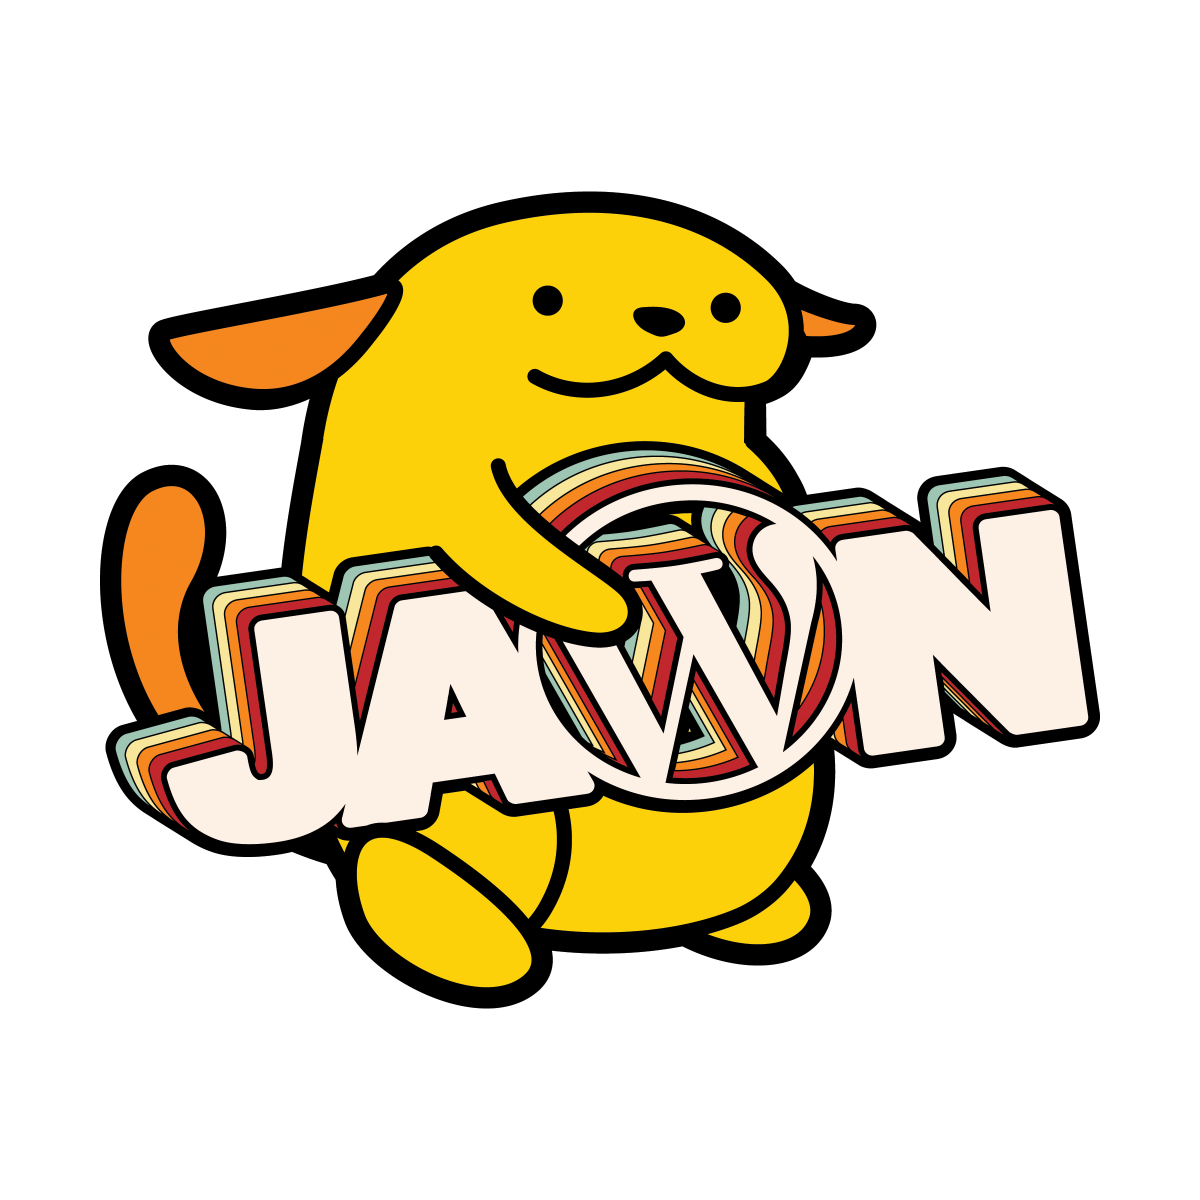 a wapuu holding the word JAWN